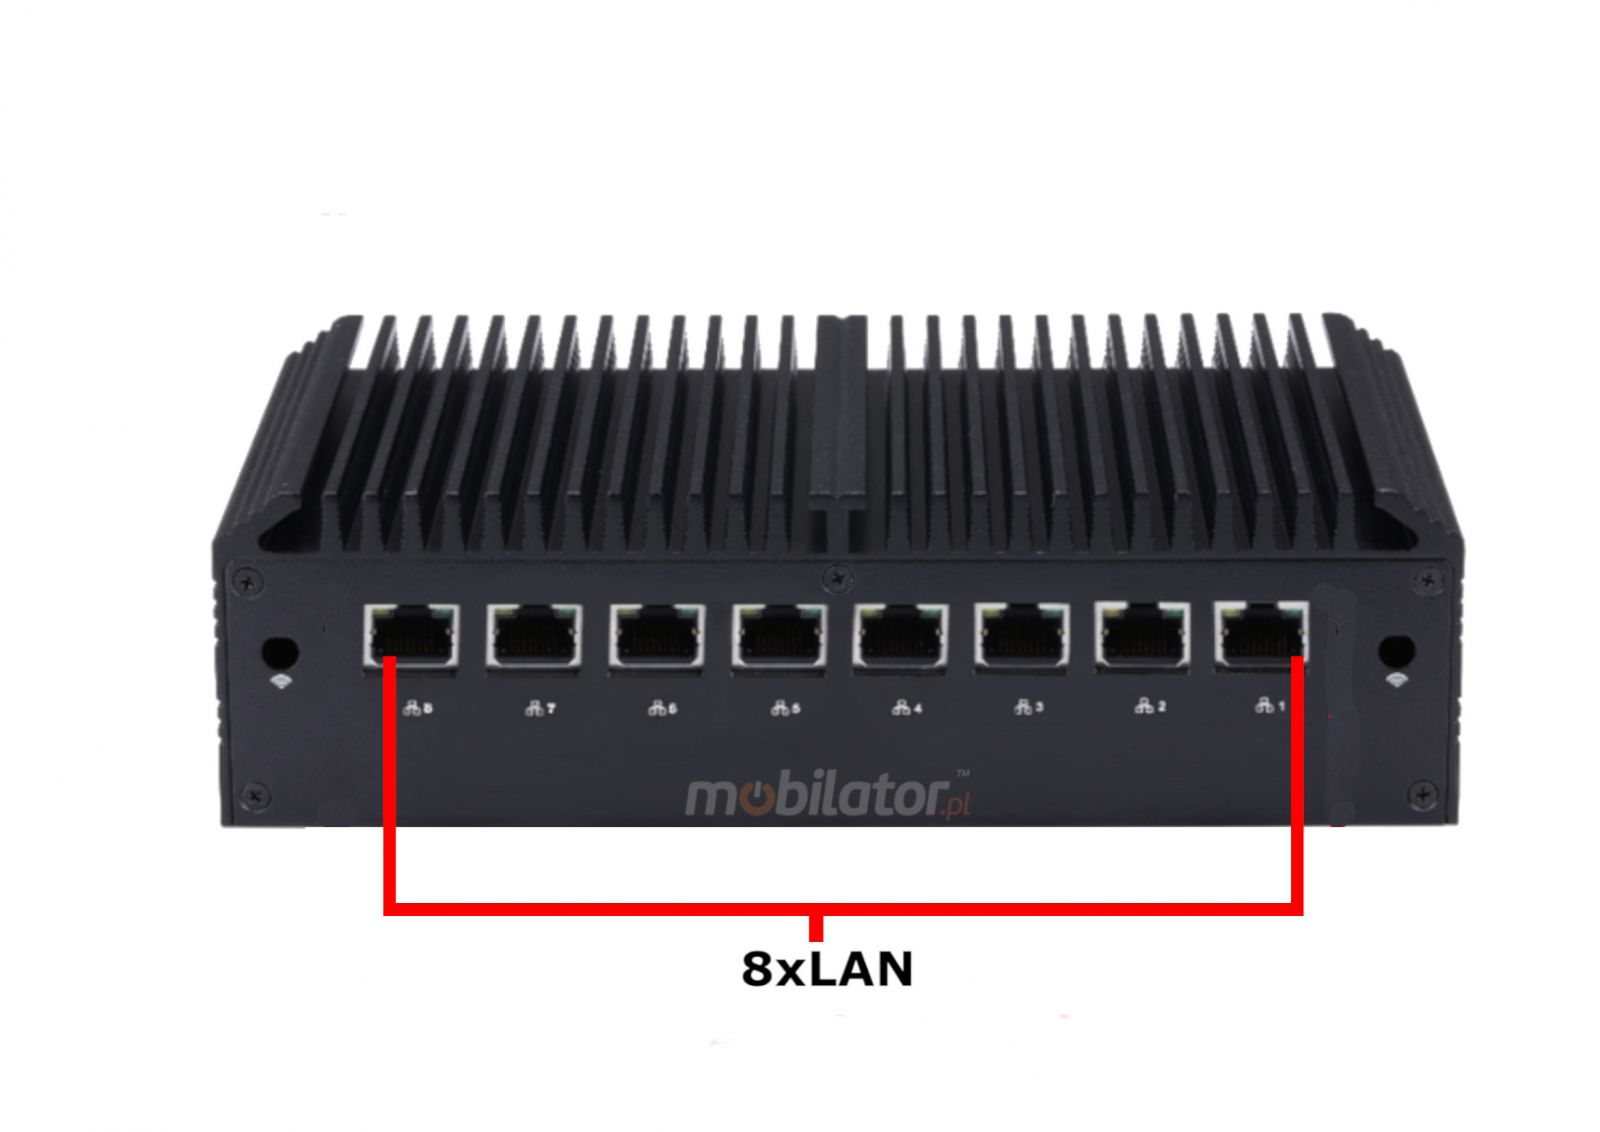 View of the back and connectors of the MiniPC Q1012GE